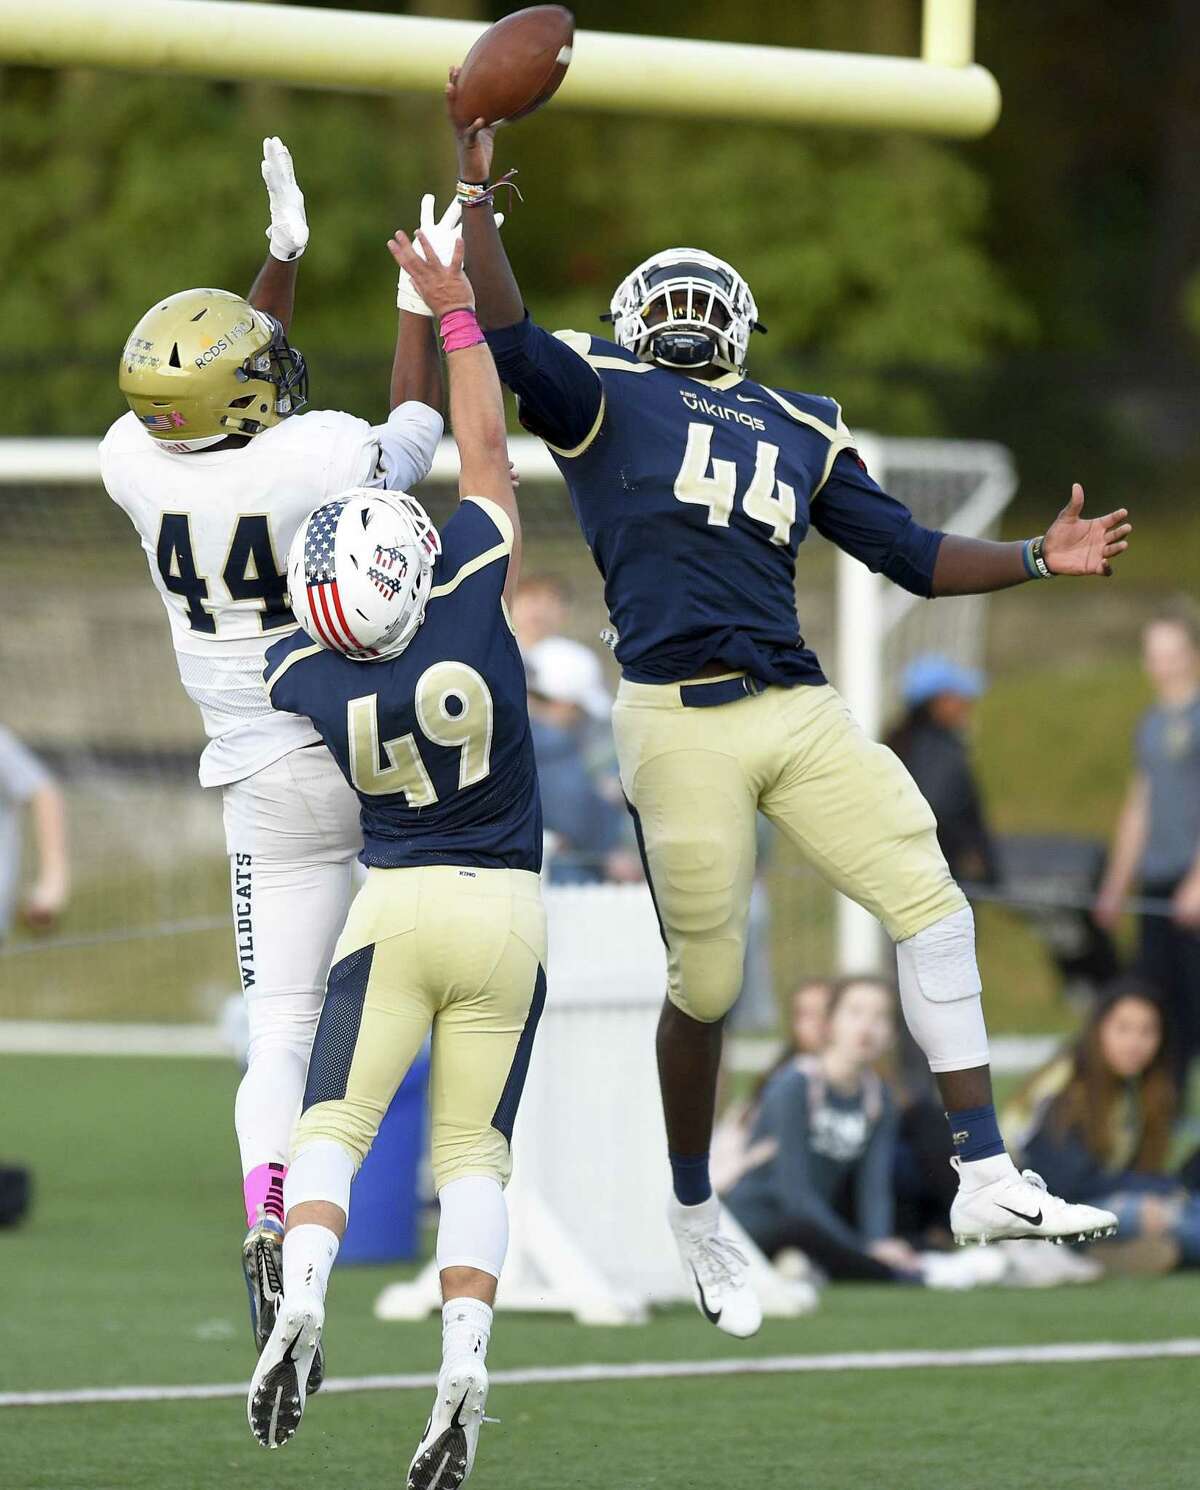 King’s Lavaughn Lewis (44) and Grady Boruchin (49) break up an end zone pass reception to Rye Country Day’s Cullen Coleman (44) during the fourth quarter of a varsity football game on Saturday in Stamford.